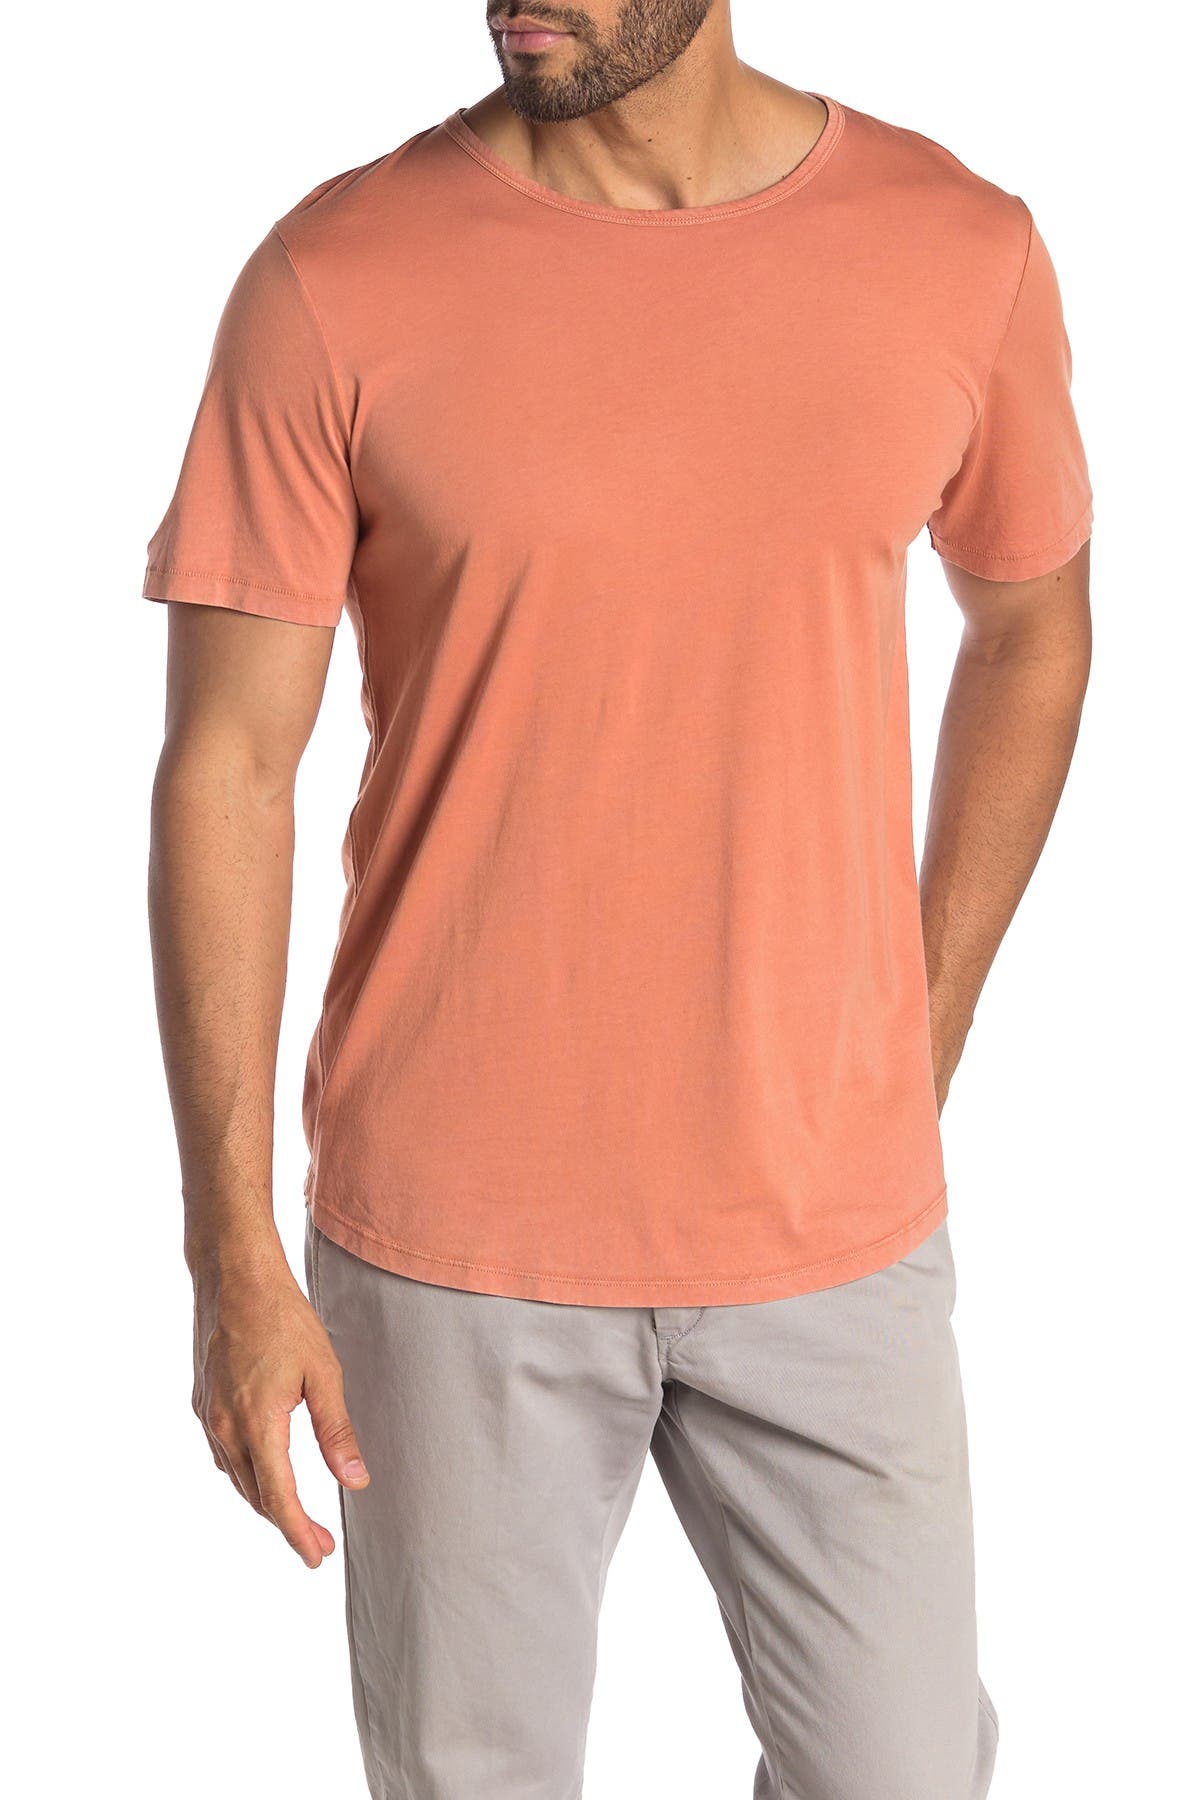 7 For All Mankind Roamer Crew Neck T-shirt In Hilo Clay